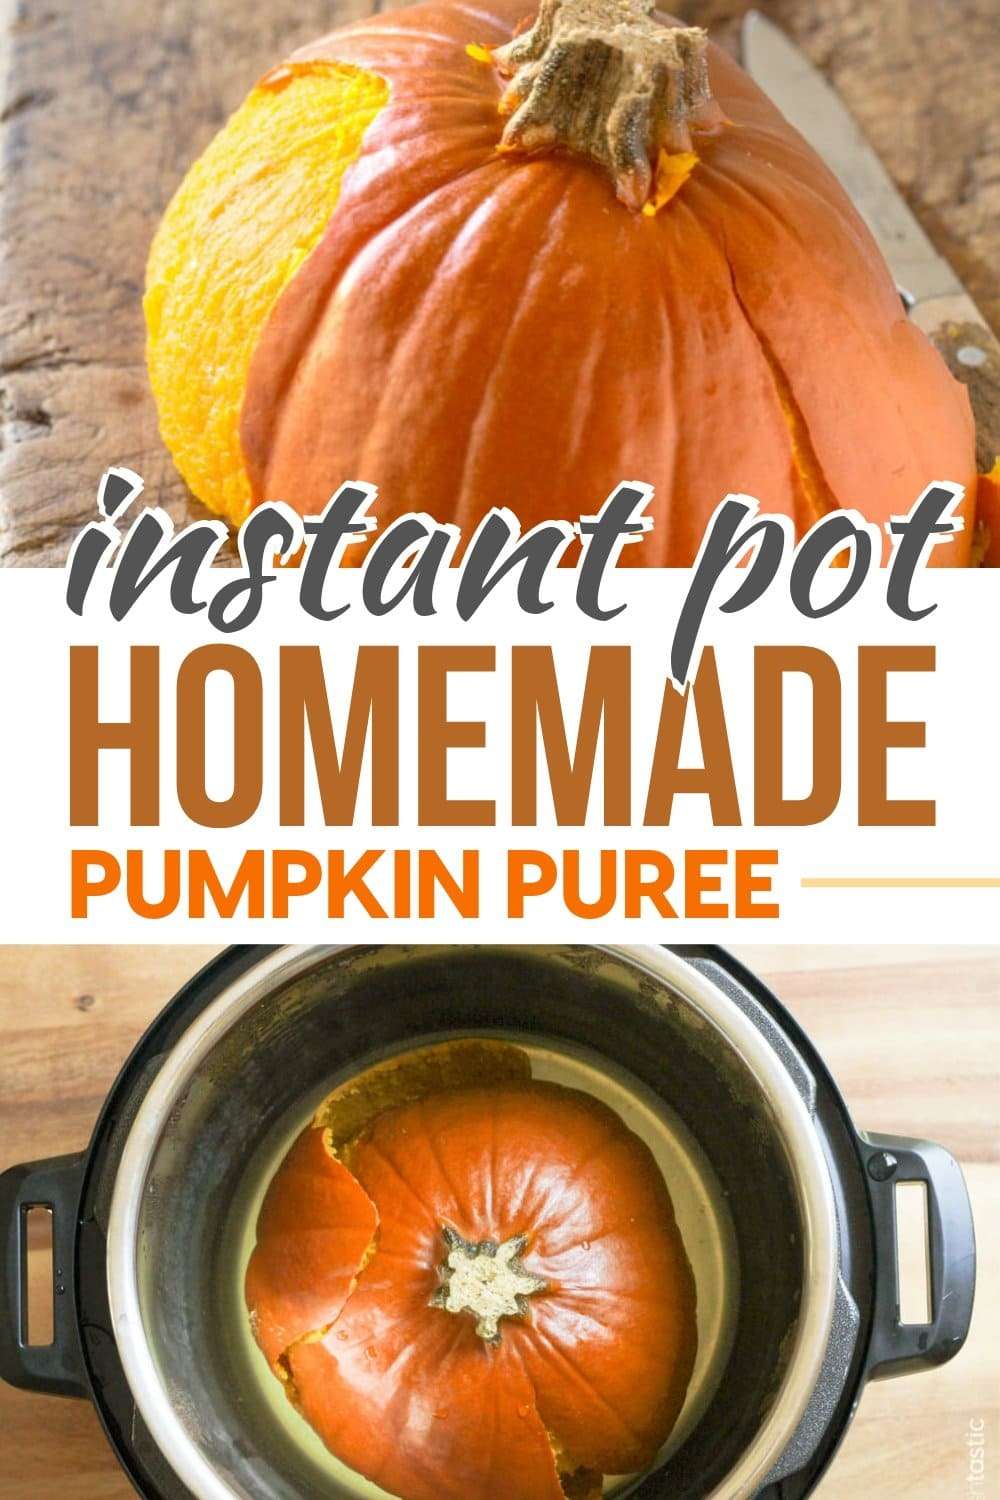 How to Cook Pumpkin in your Instant Pot